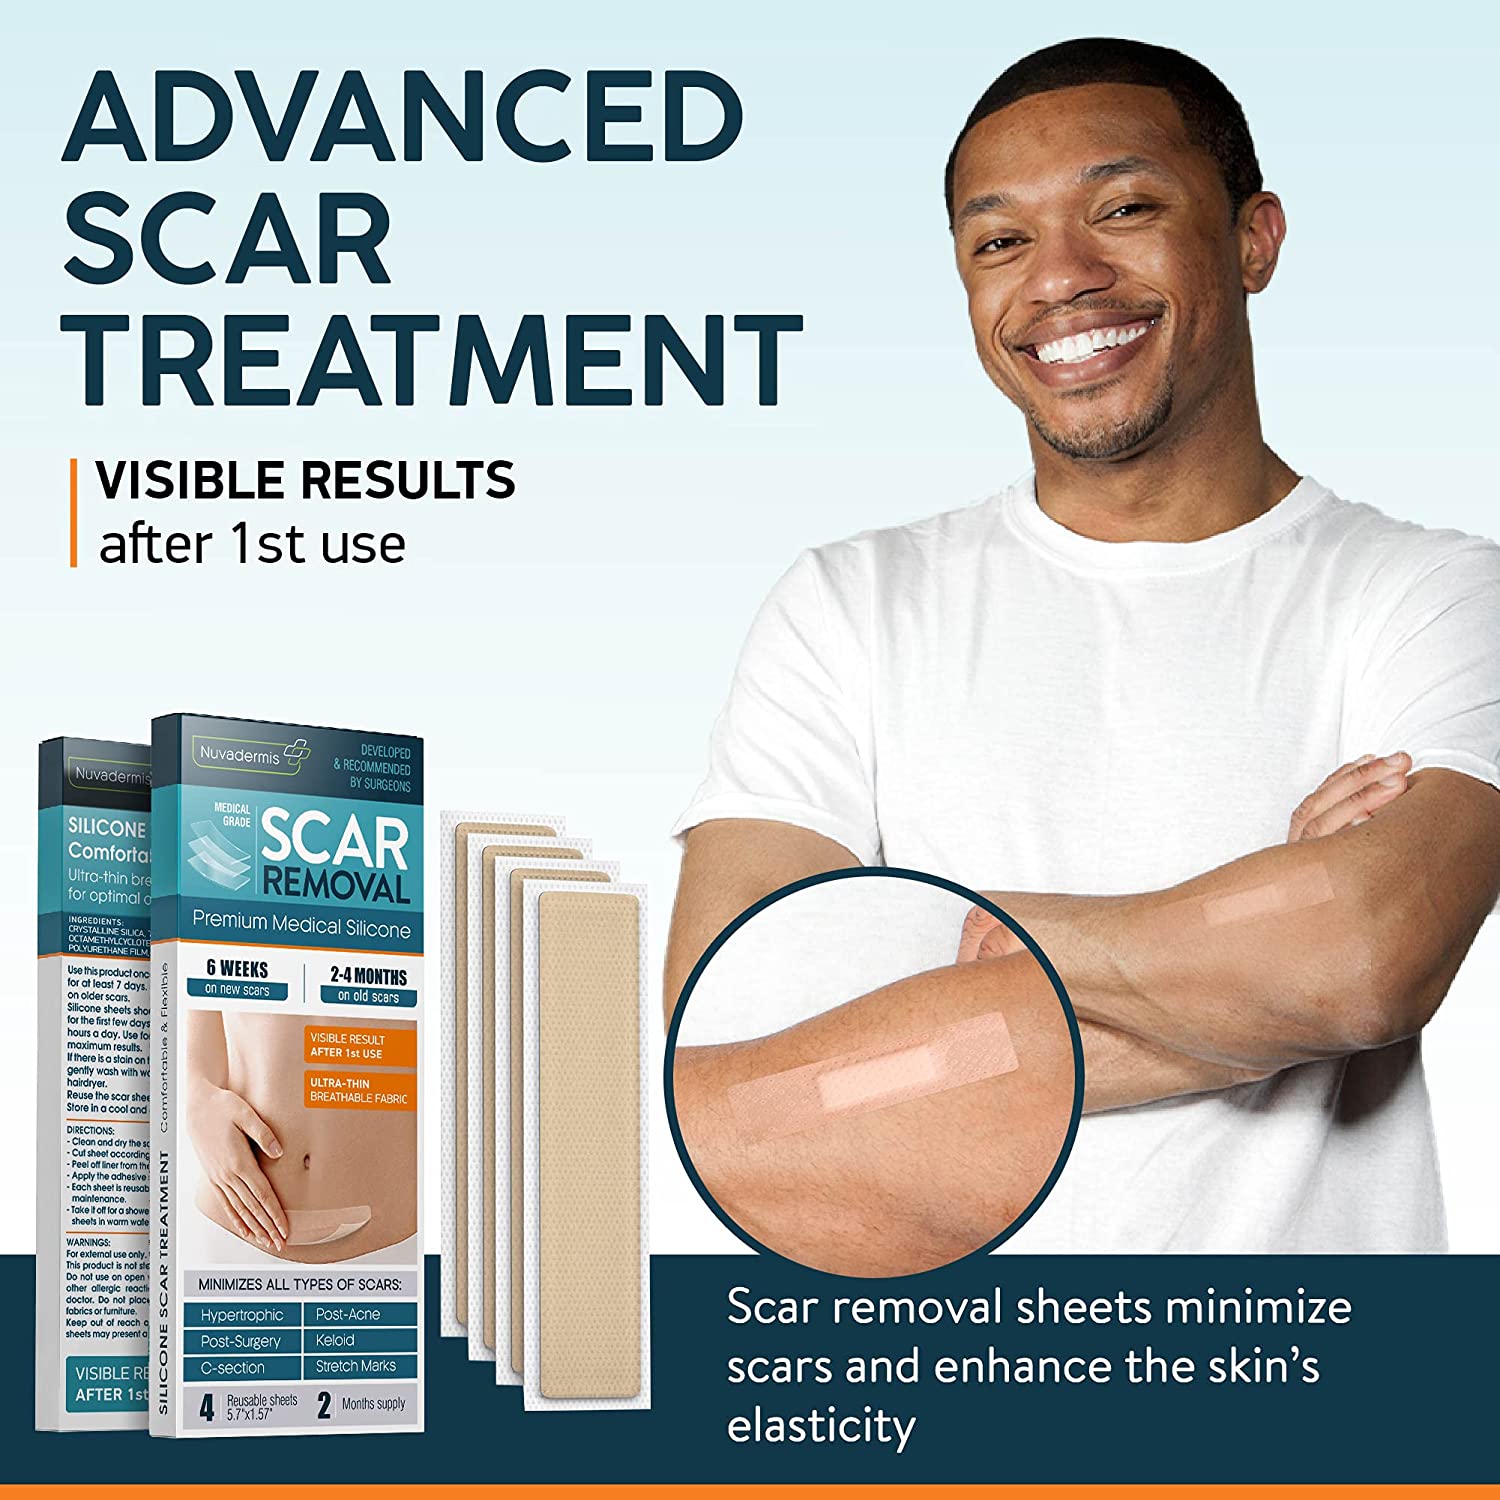 Advanced Scar Treatment Silicone Scar Removal Sheets by NUVADERMIS